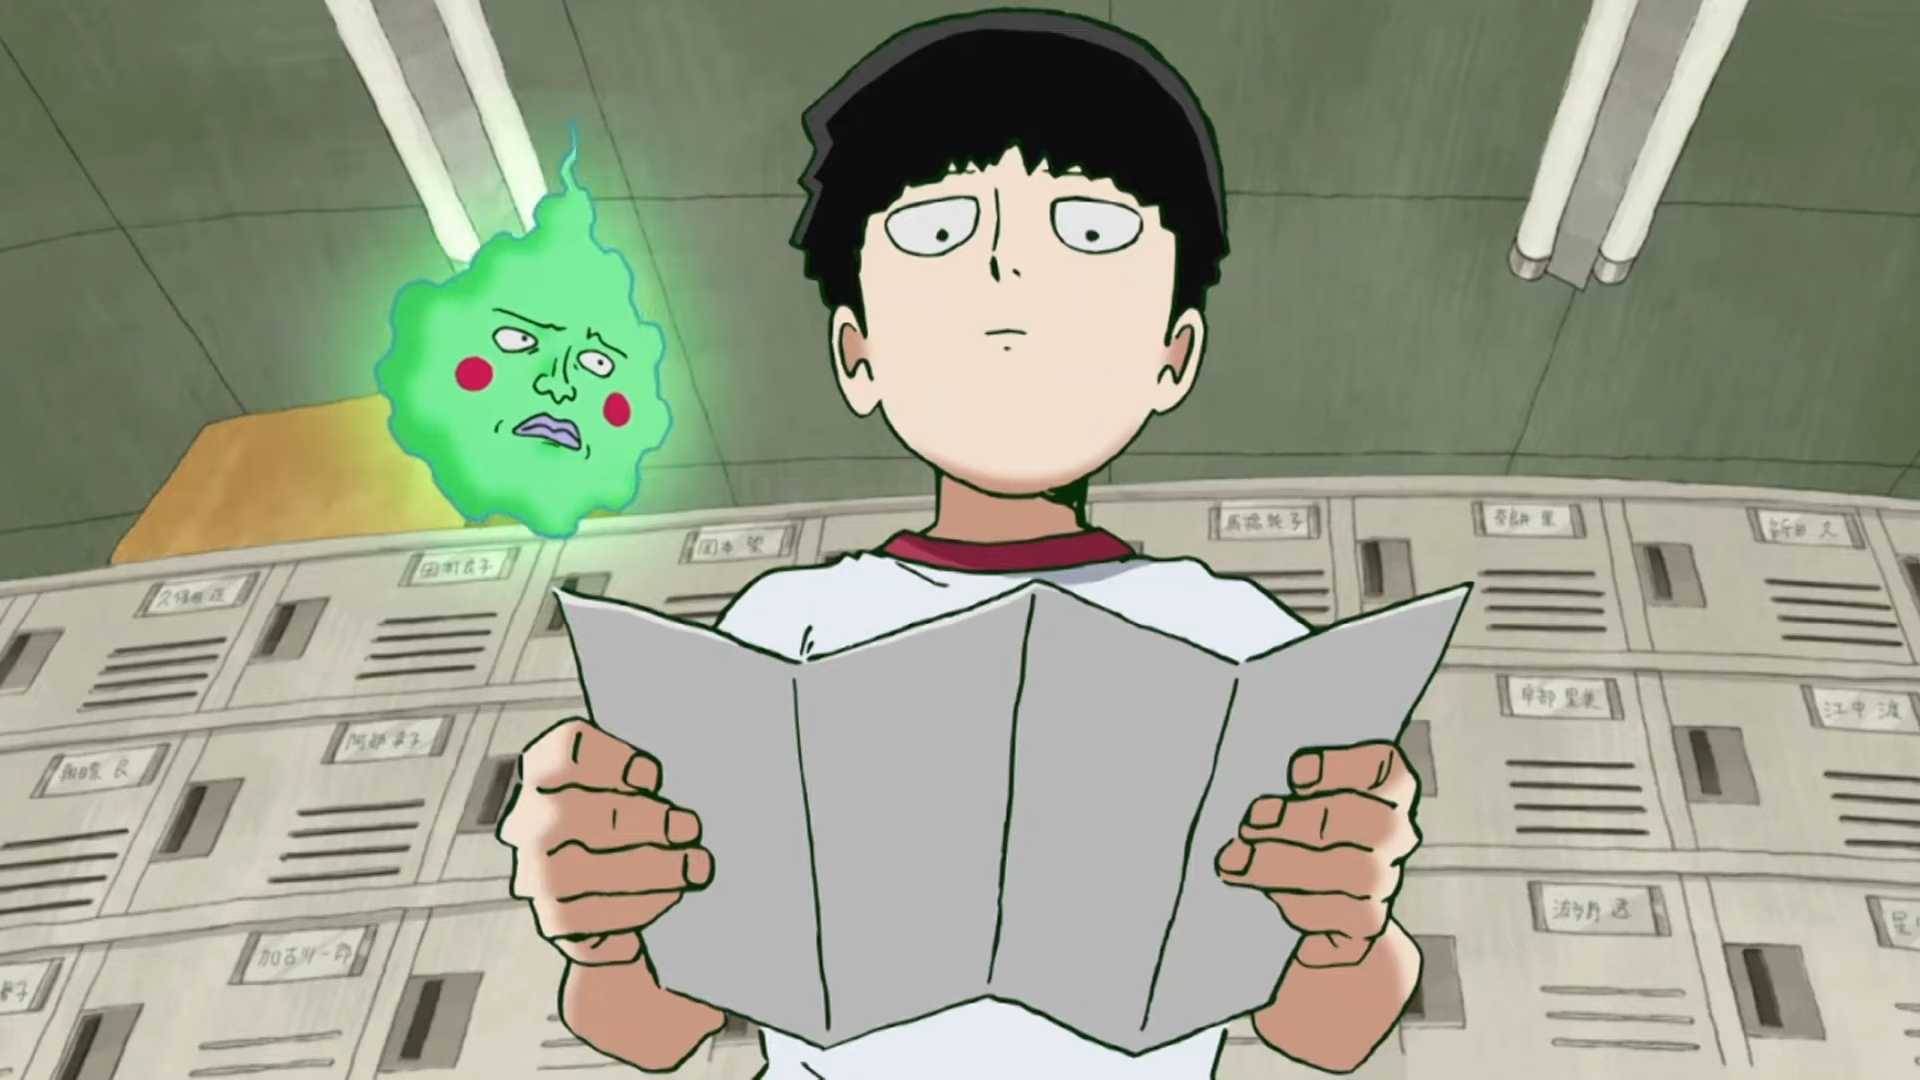 Mob and Dimple 